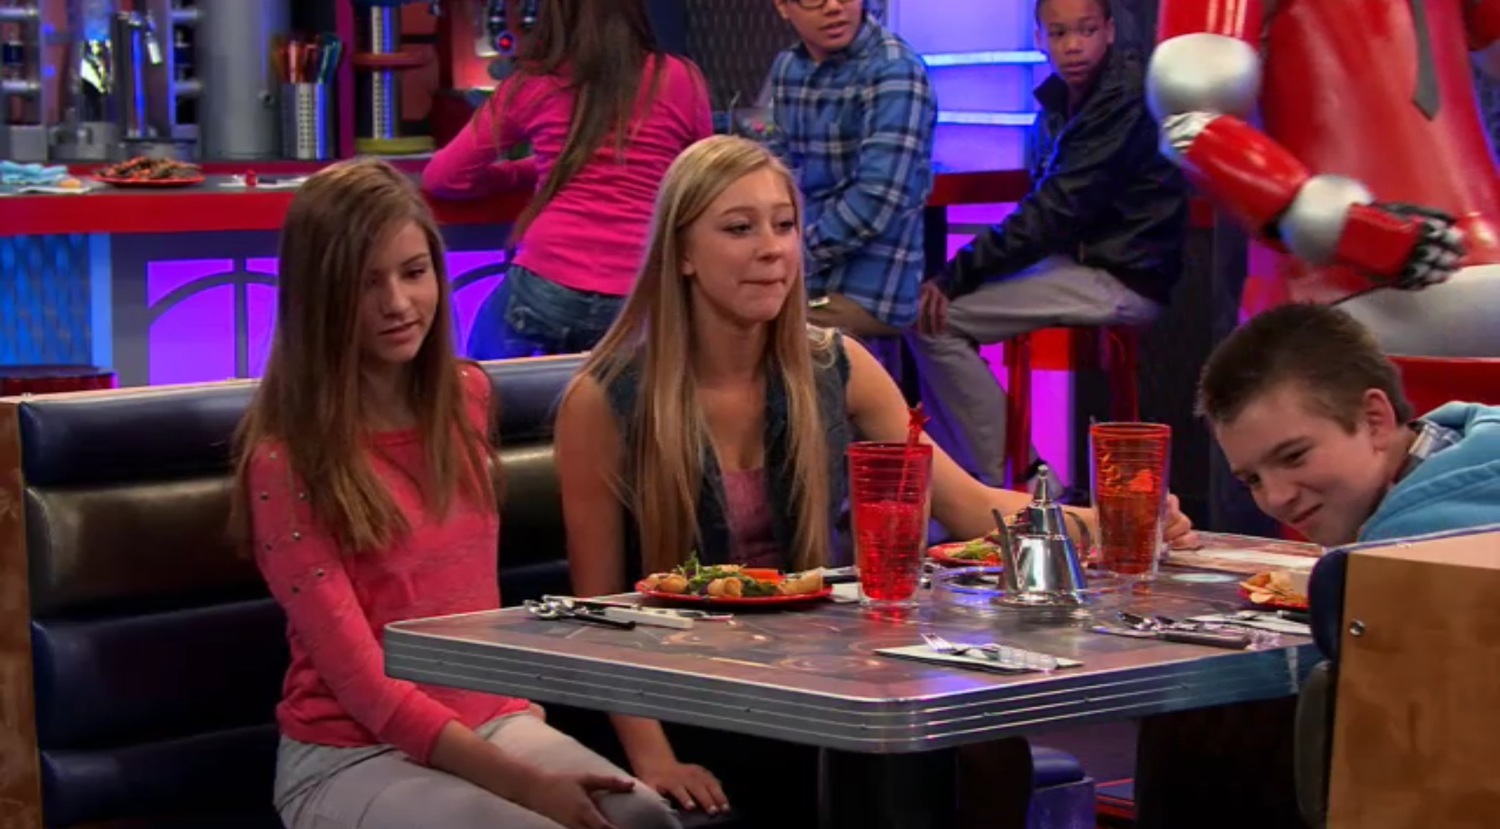 Seaonna Chanadet on Sam and Cat